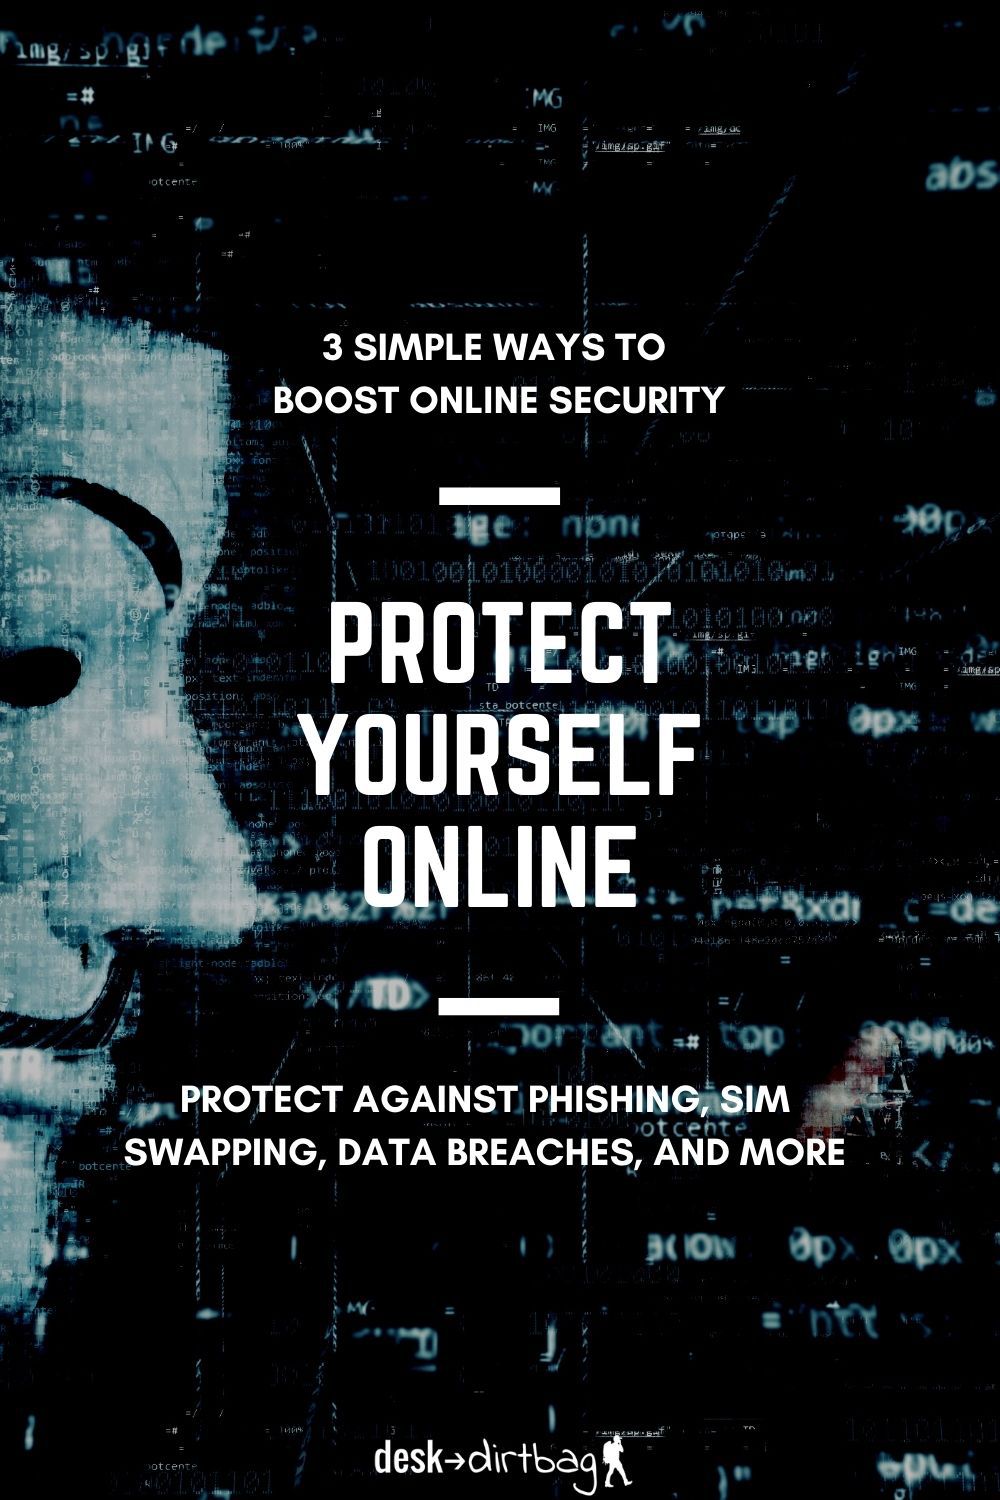 How to Protect Yourself Online: A Simple Guide location-independence